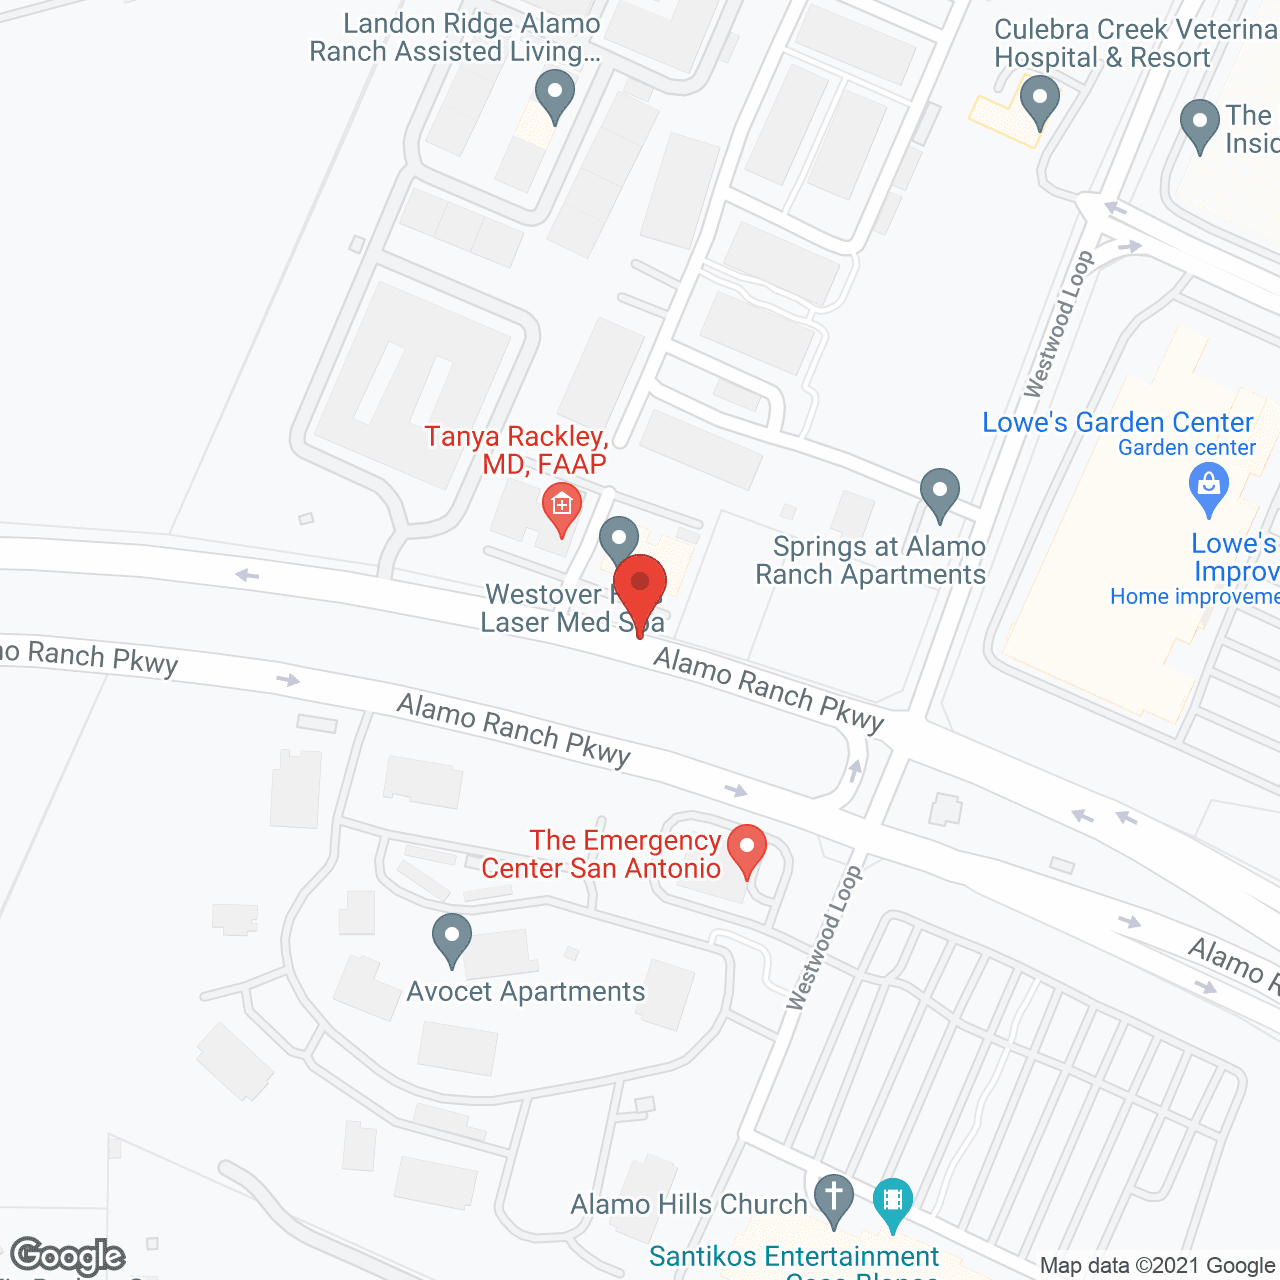 Landon Ridge Alamo Ranch Assisted Living and Memory Care in google map